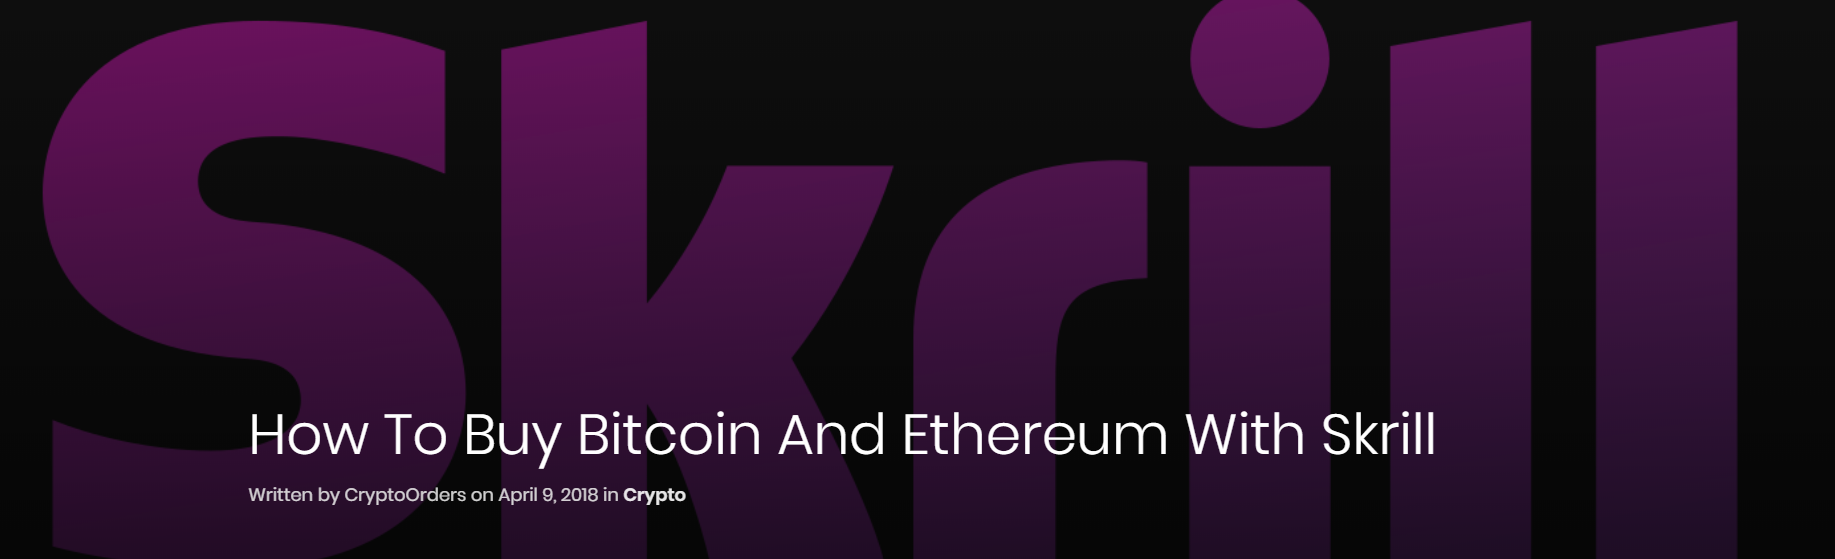 How To Buy Bitcoin And Ethereum With Skrill Steemit - 